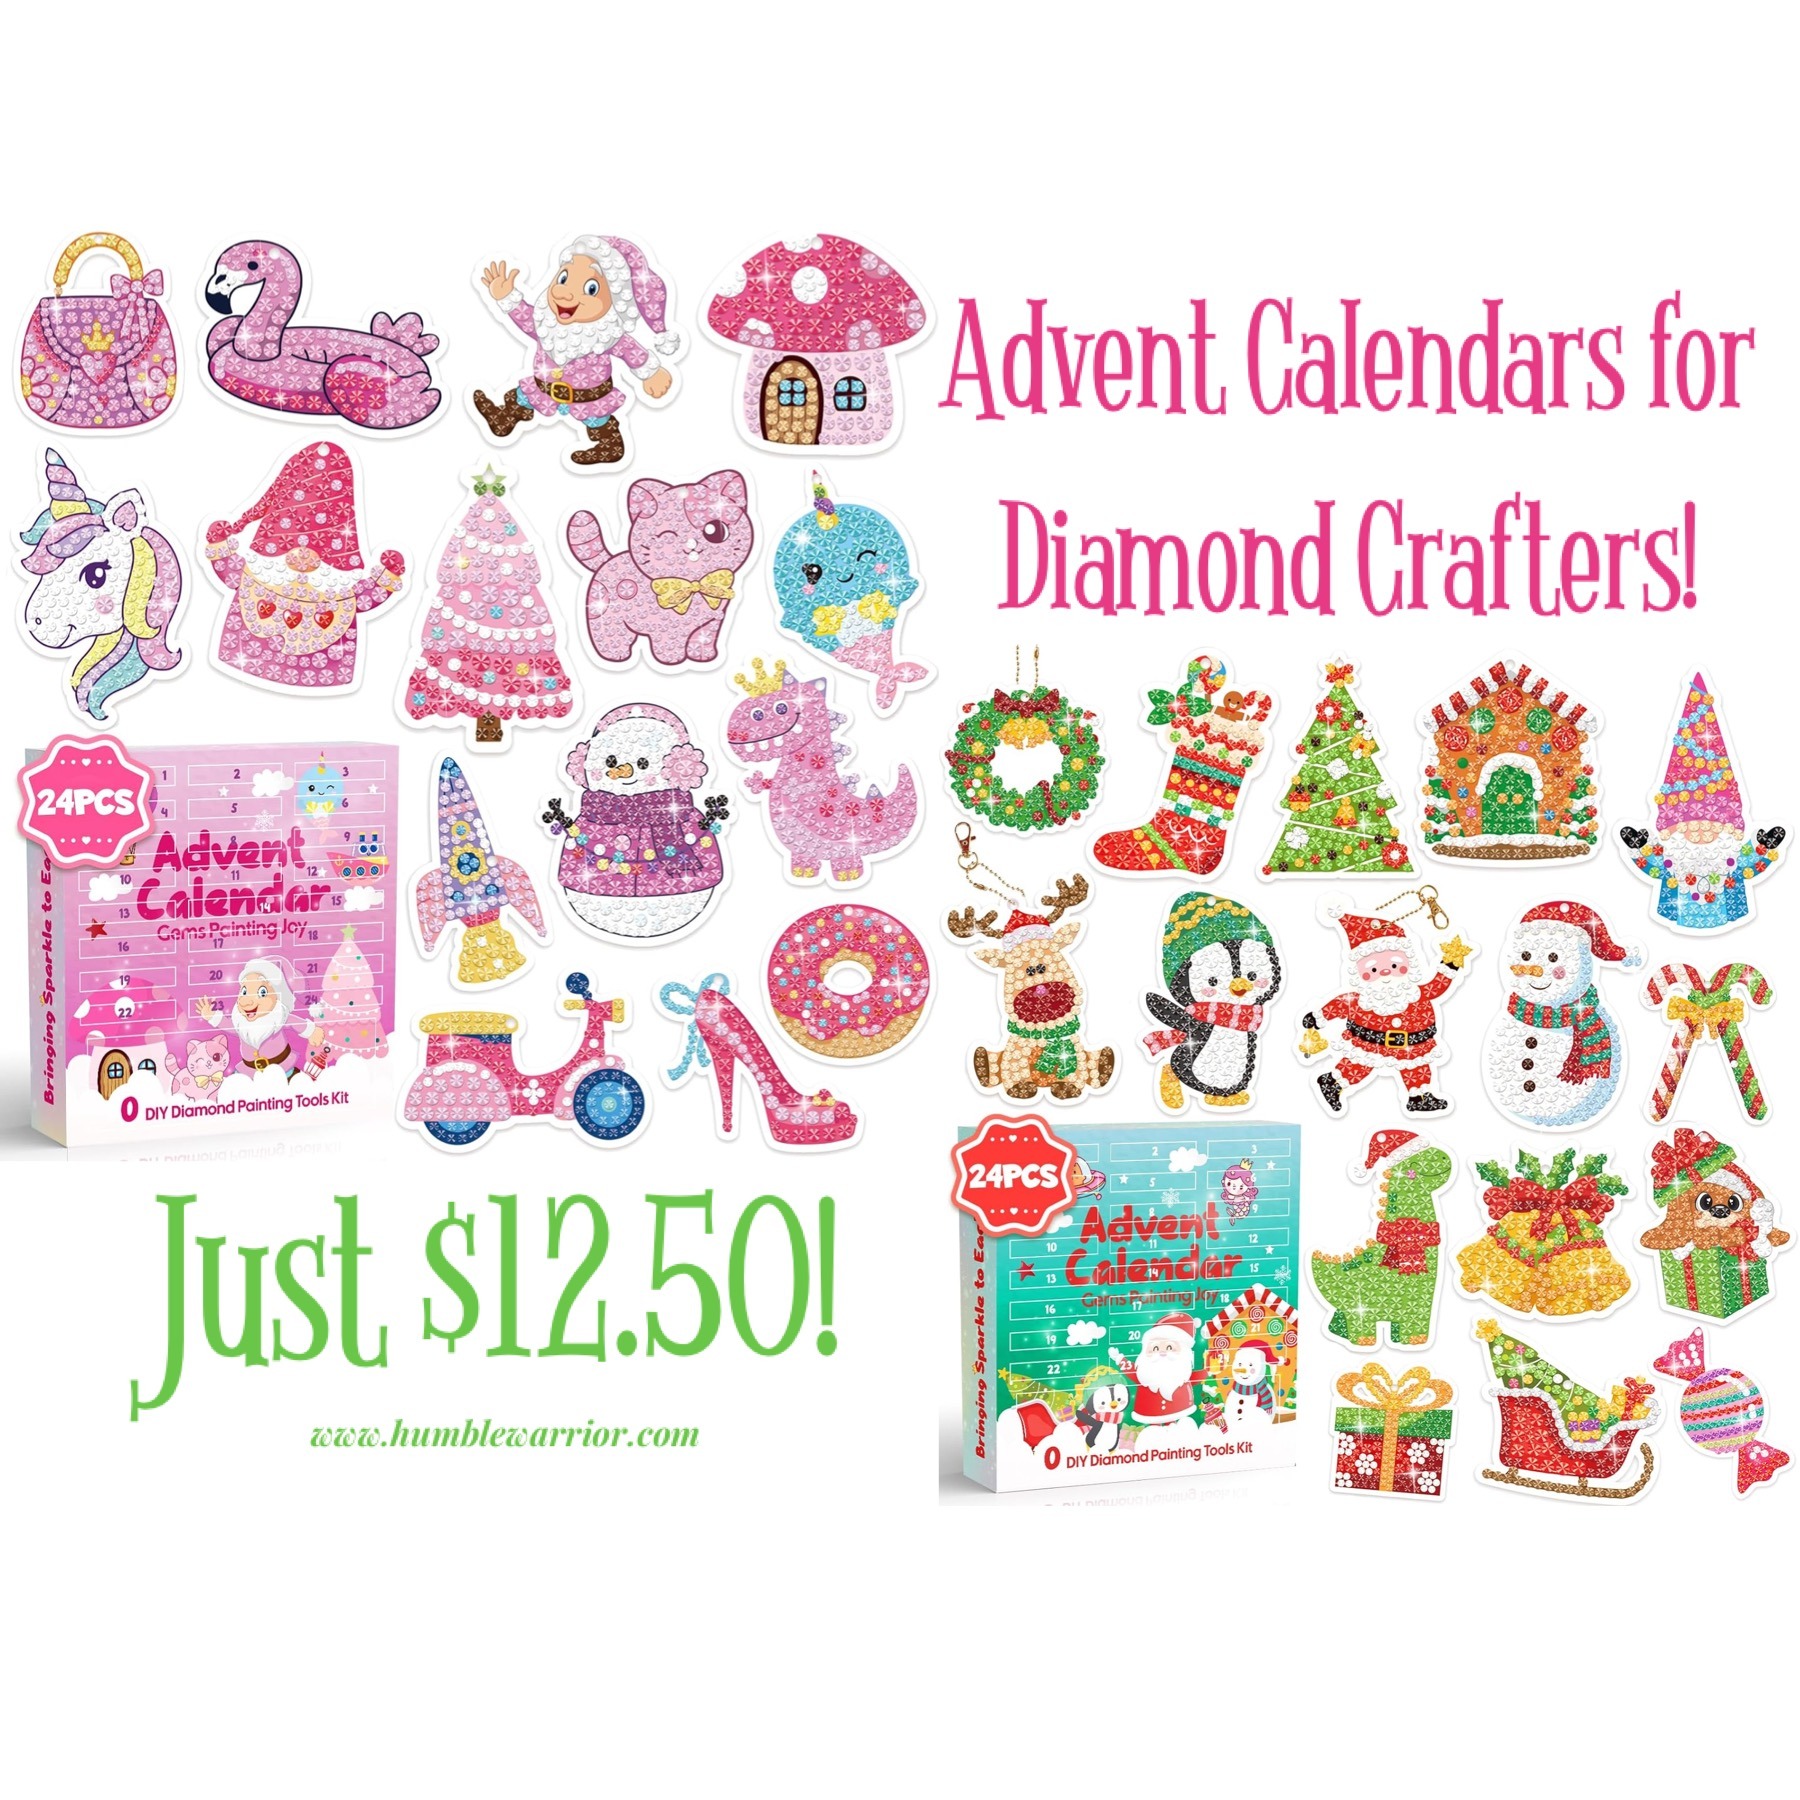 ADVENT CALENDARS FOR DIAMOND PAINTERS! Home of The Humble Warrior